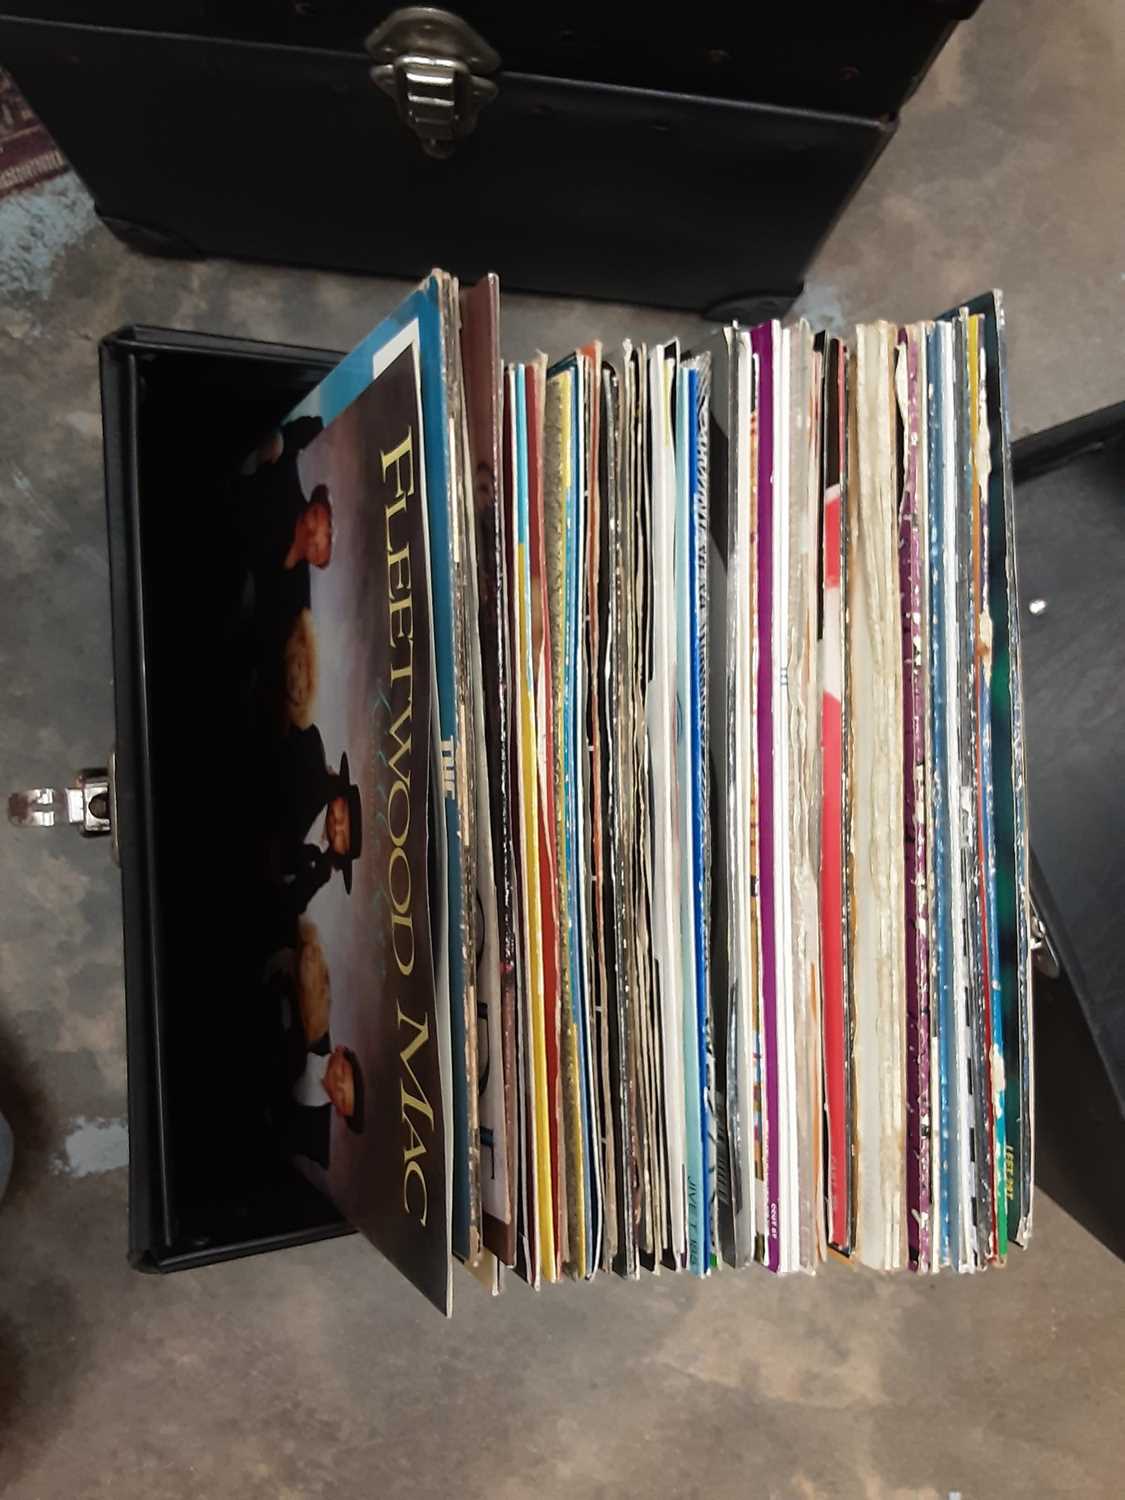 Two DJ cases of 12" singles including Soul II Soul, Techtronic, Beatmasters, Stranglers, New Order, - Image 4 of 4